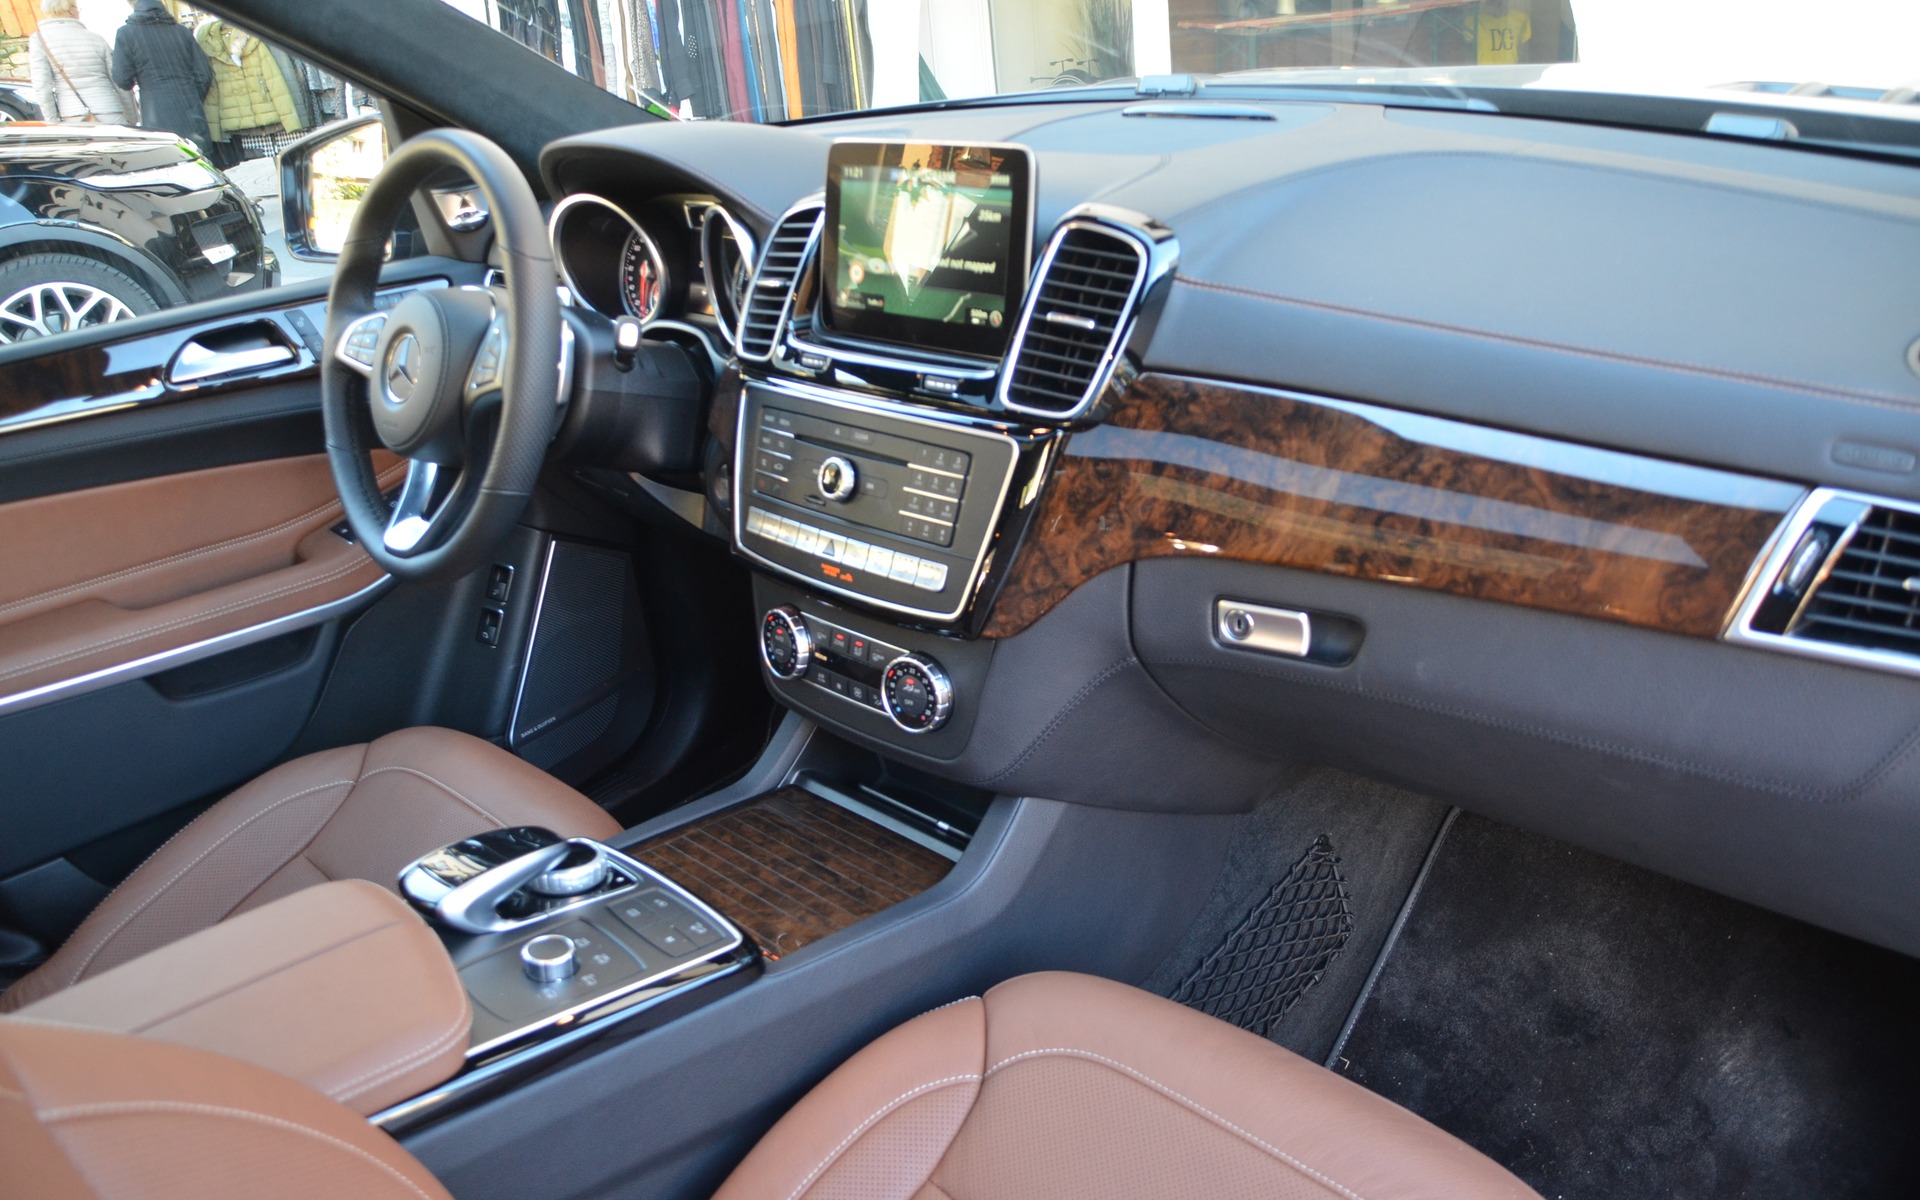 Cabin materials inside the 2017 Mercedes-Benz GLS are very rich